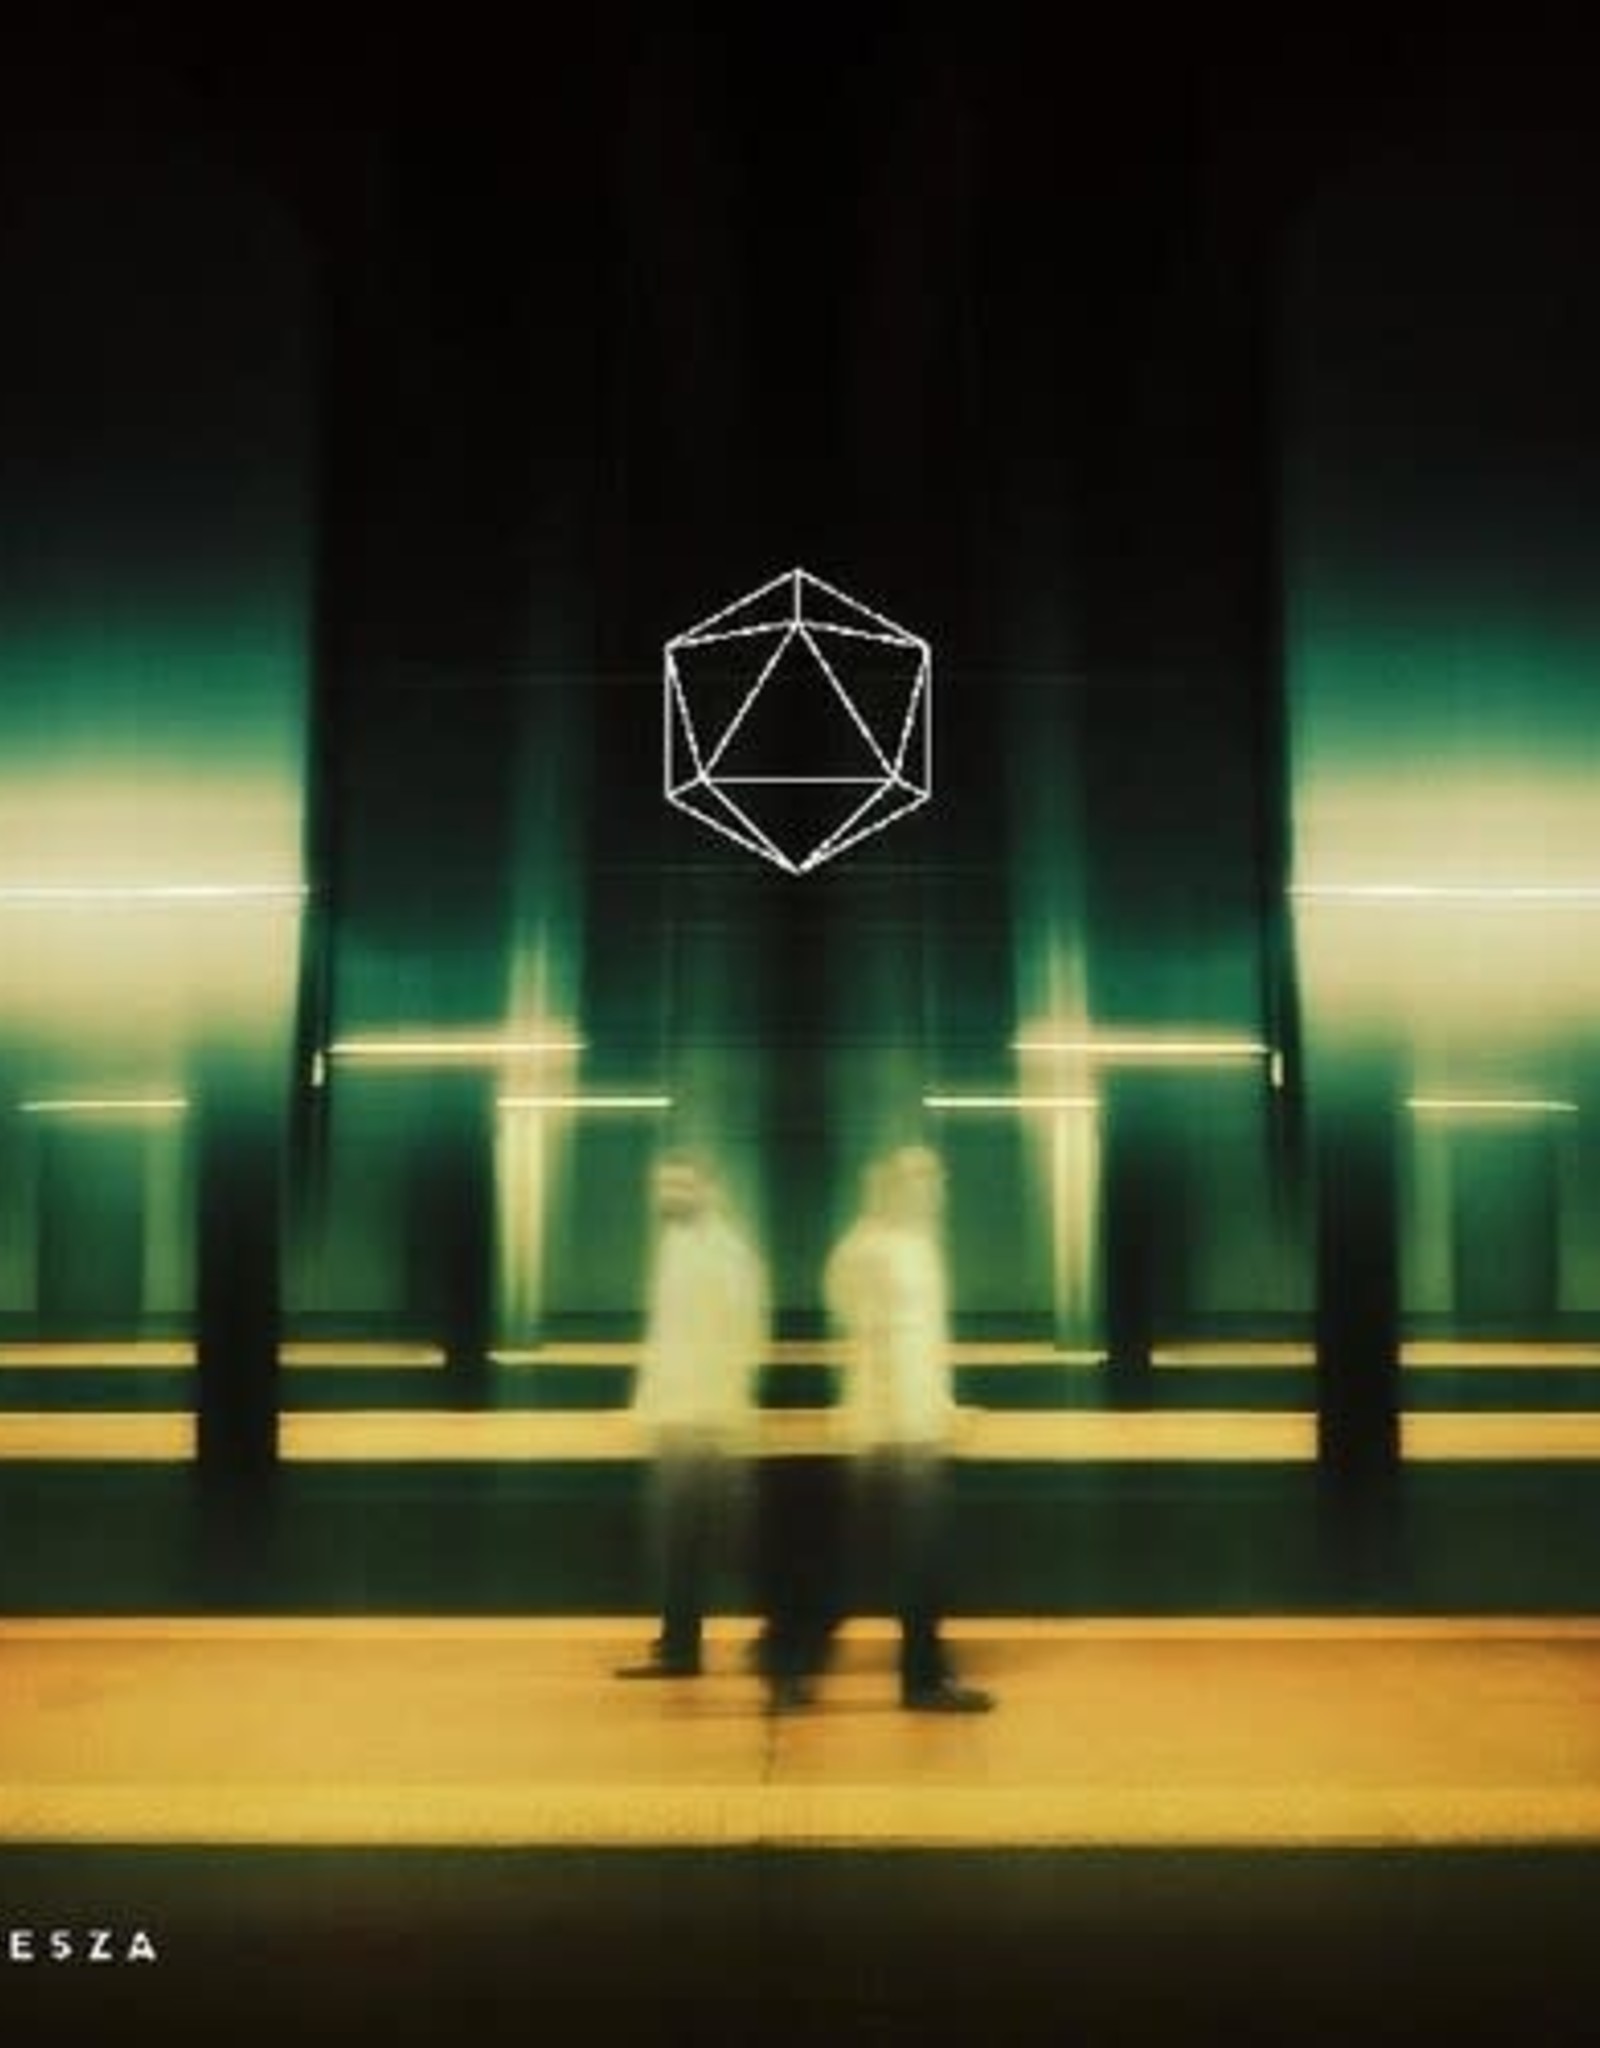 Odesza - The Last Goodbye (Limited Edition, Clear Vinyl, Indie Exclusive Art Card)